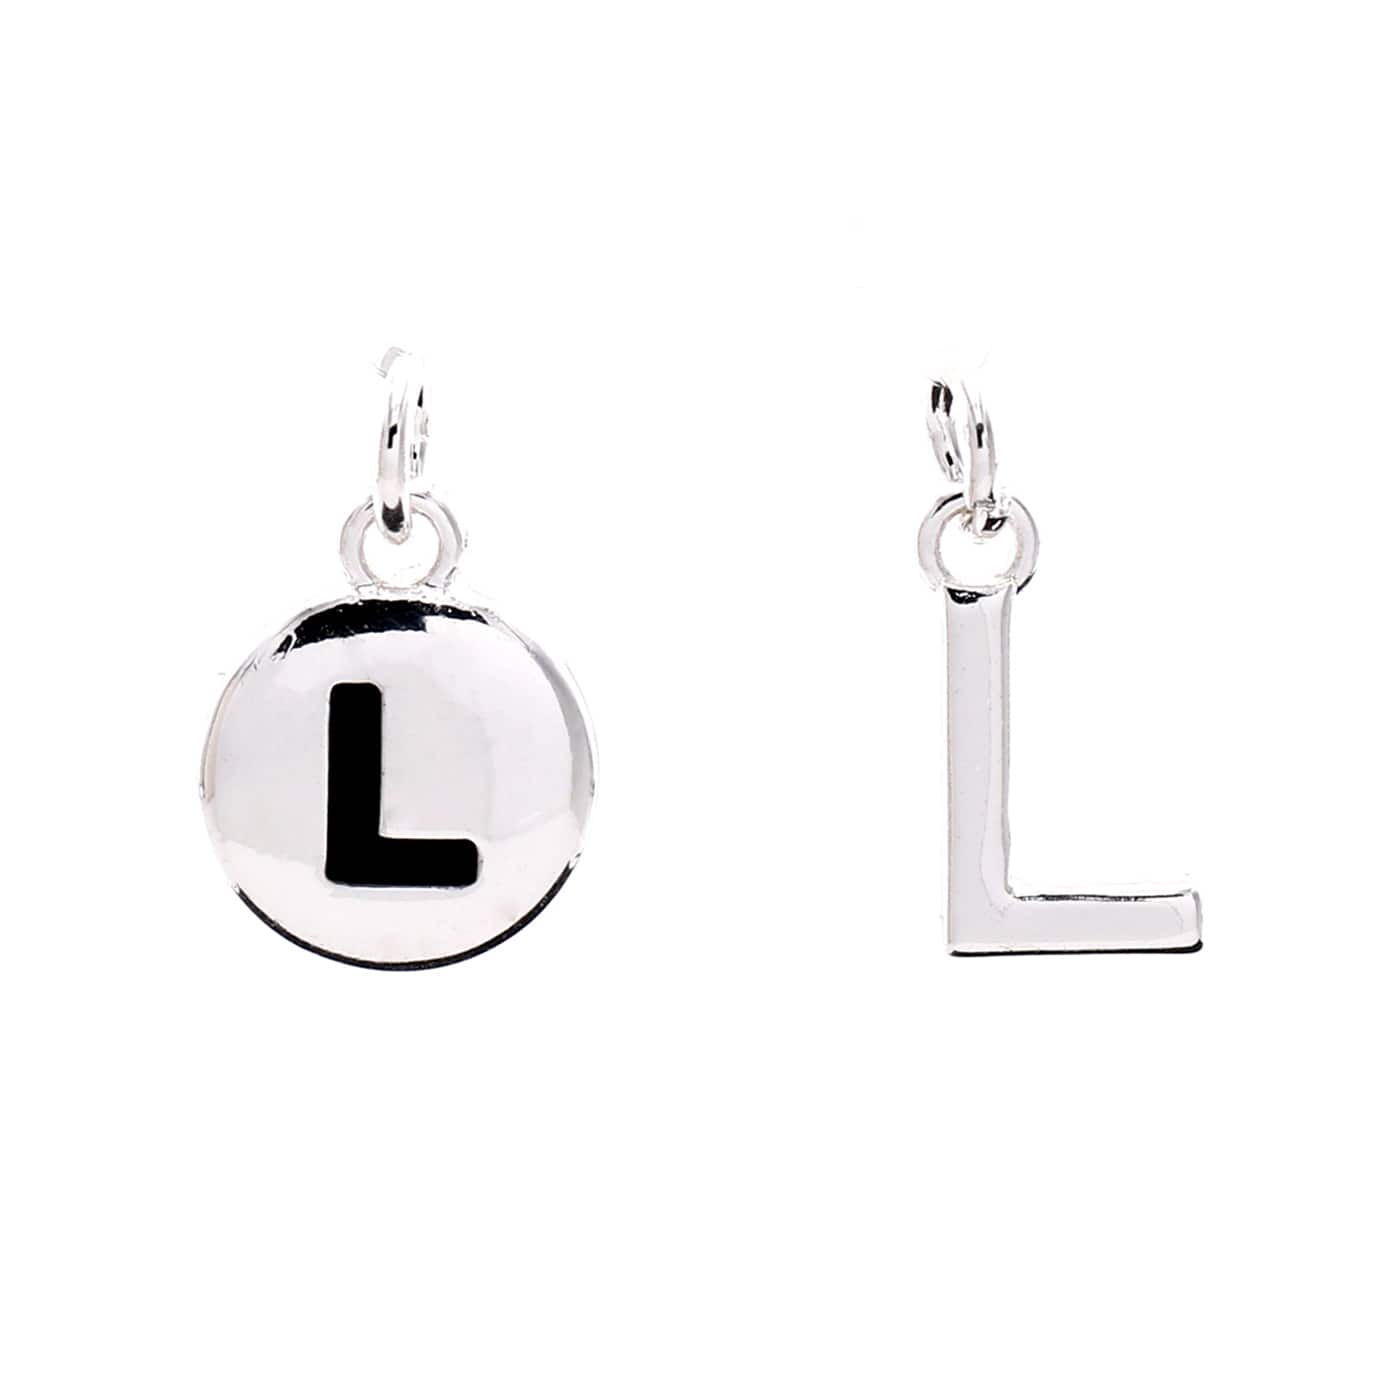 Charmalong™ Silver Plated Letter Charms by Bead Landing™